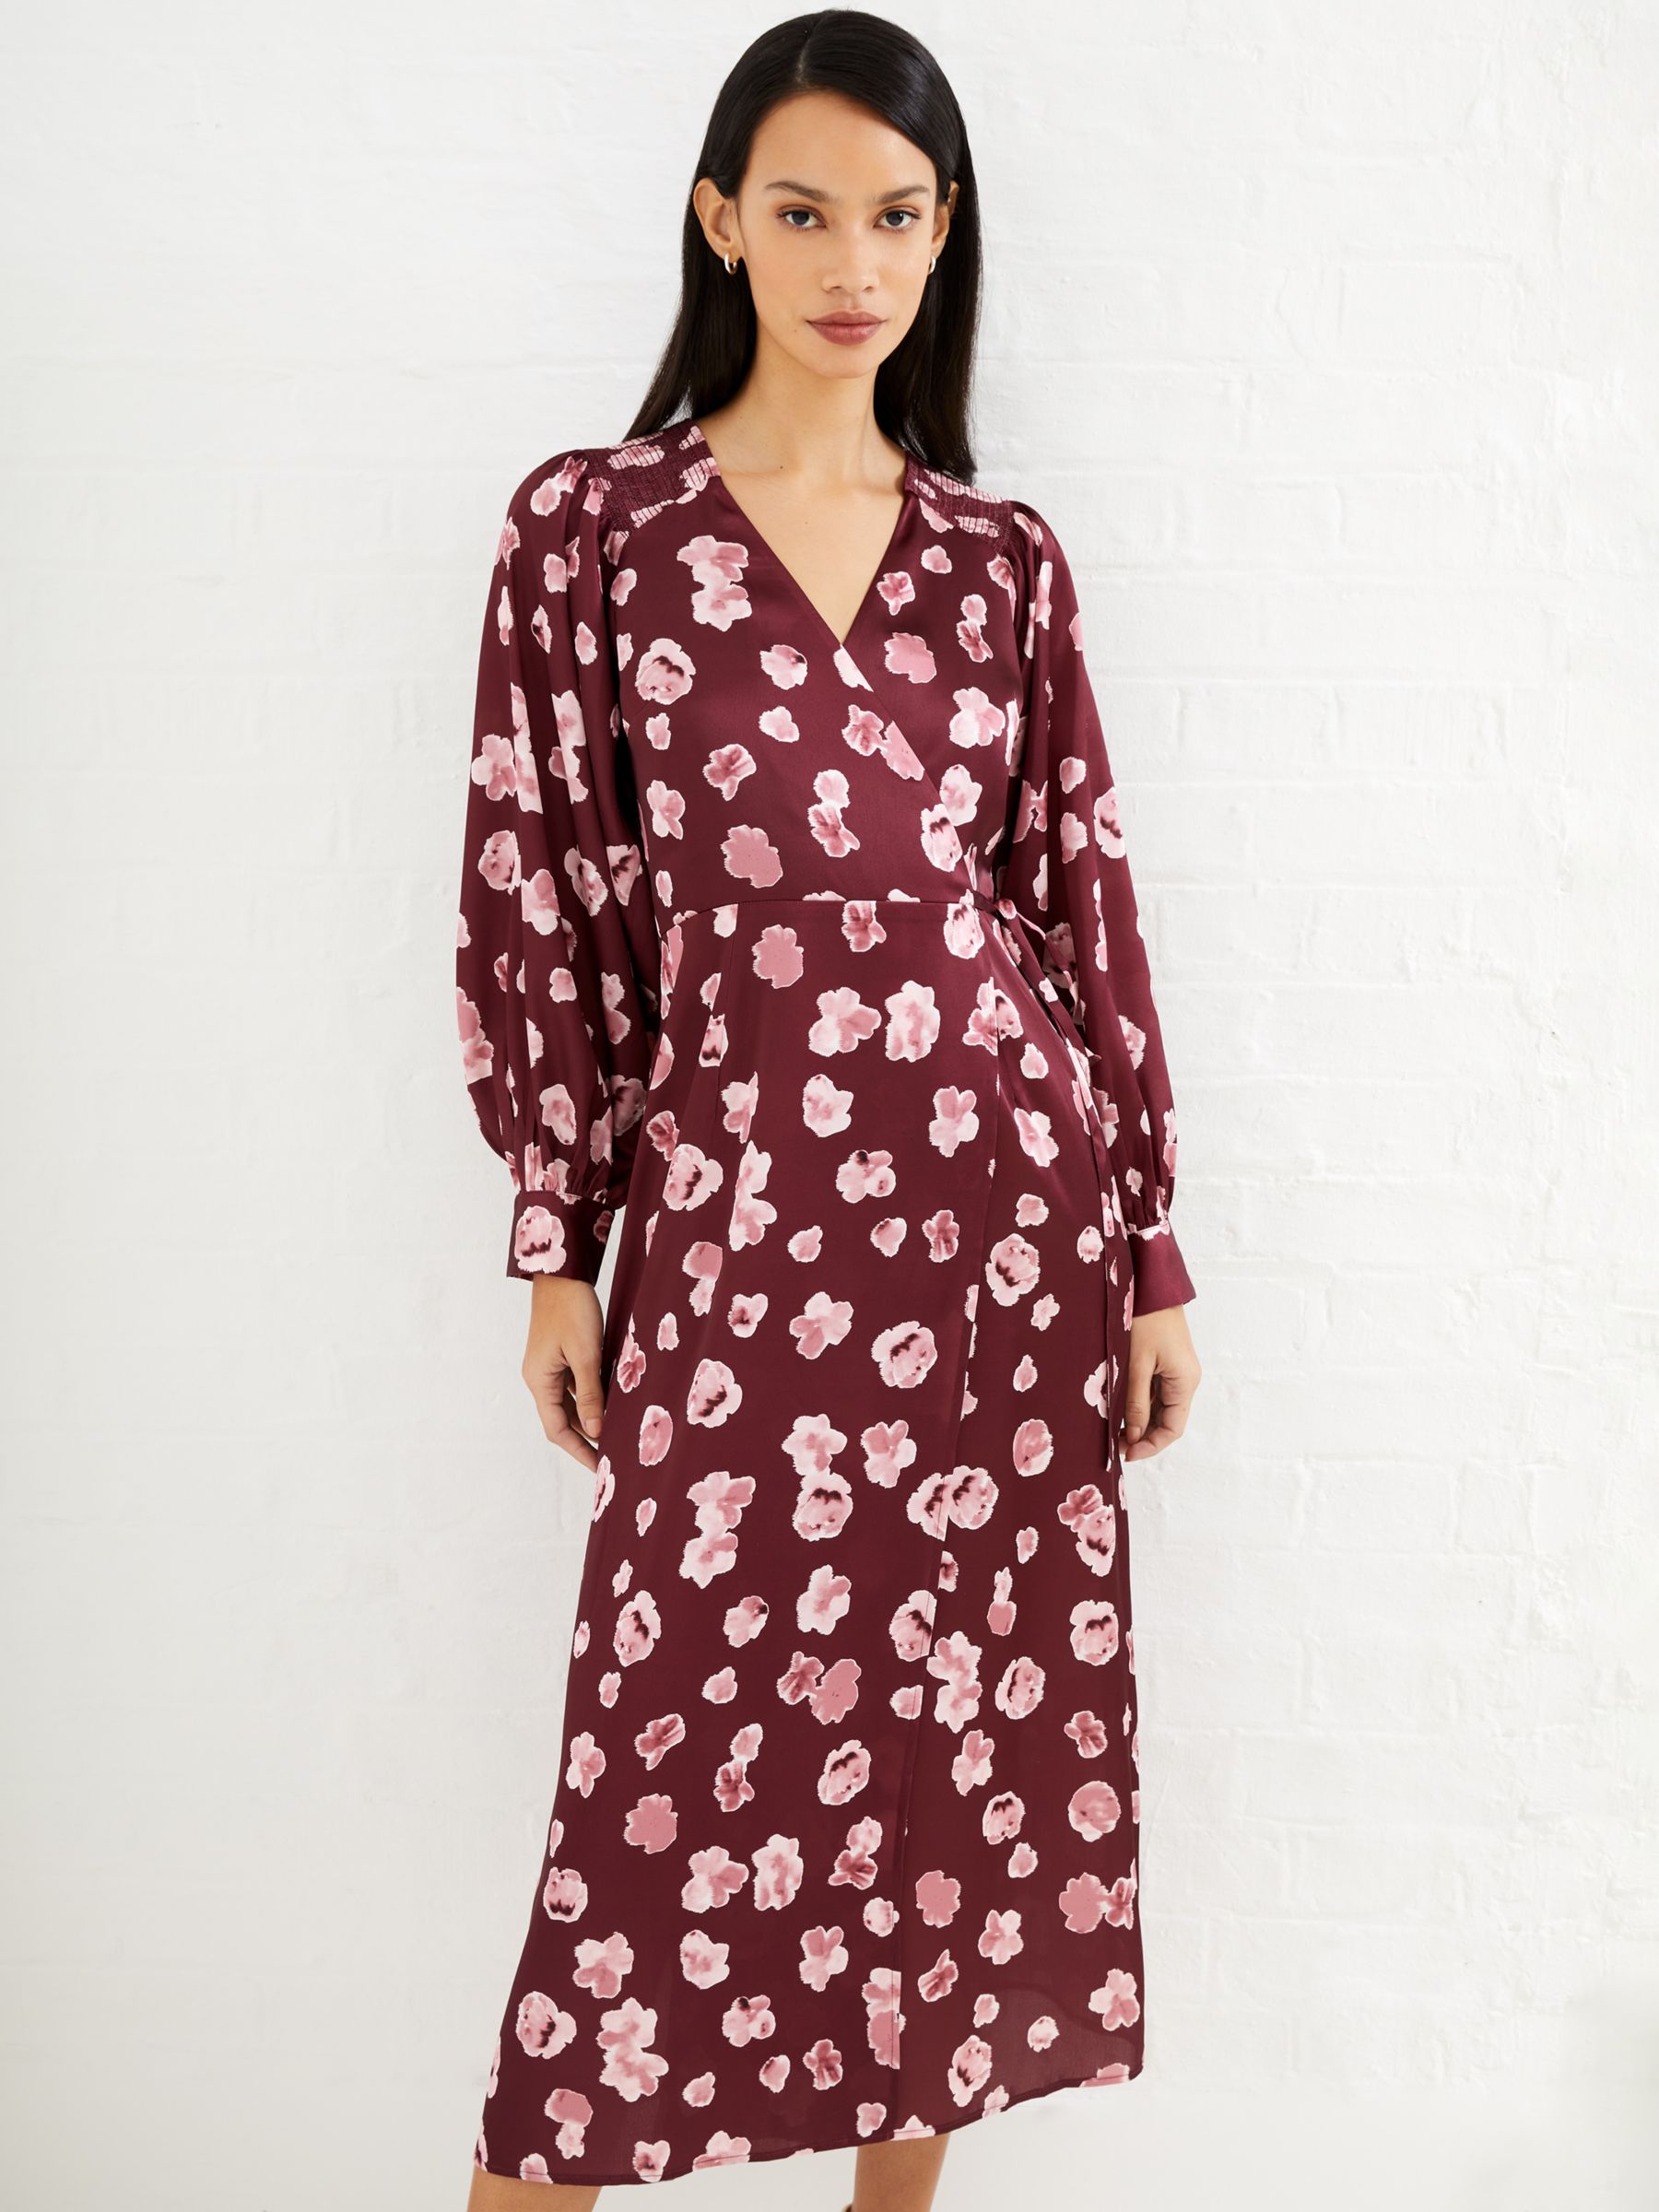 French Connection Bronwen Floral Satin Wrap Dress, Chocolate Truffle, 8